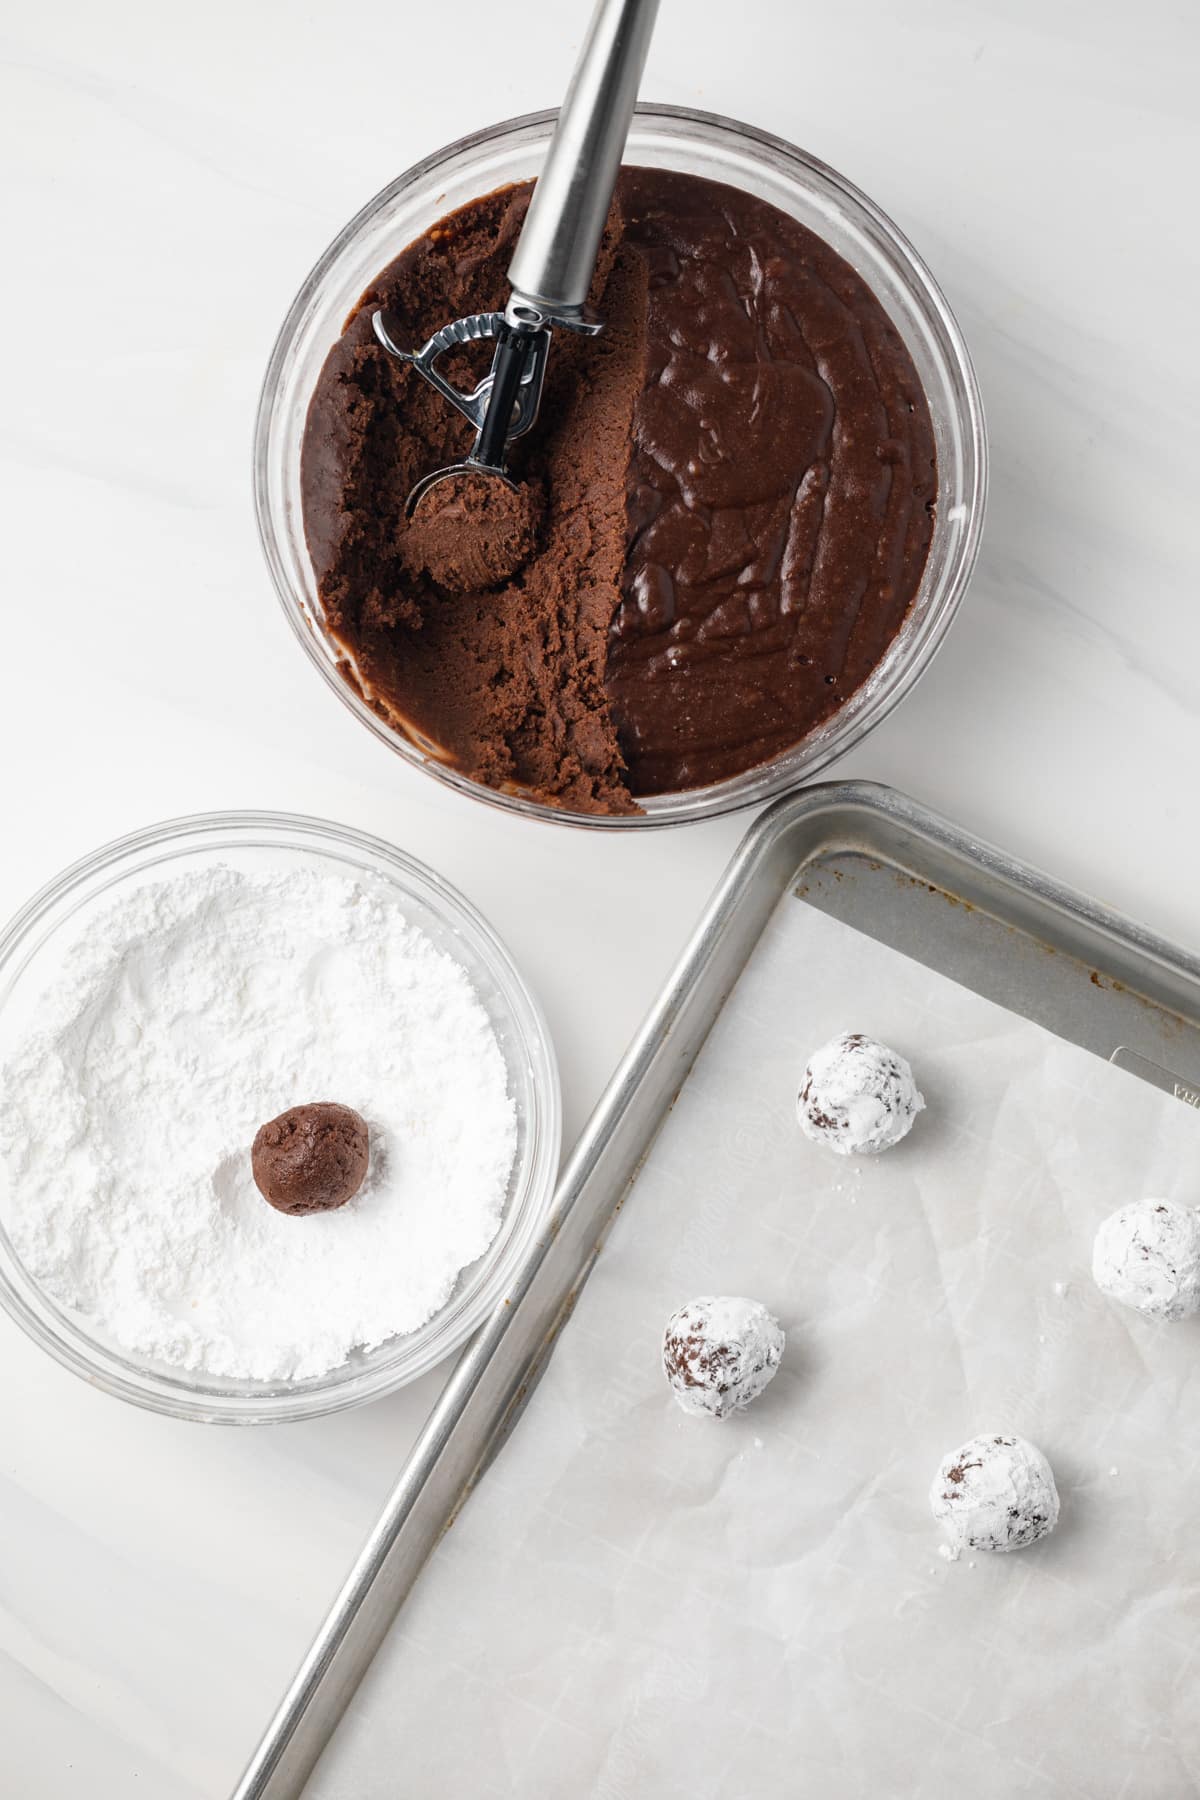 Chocolate cookie dough rolled in powdered sugar.